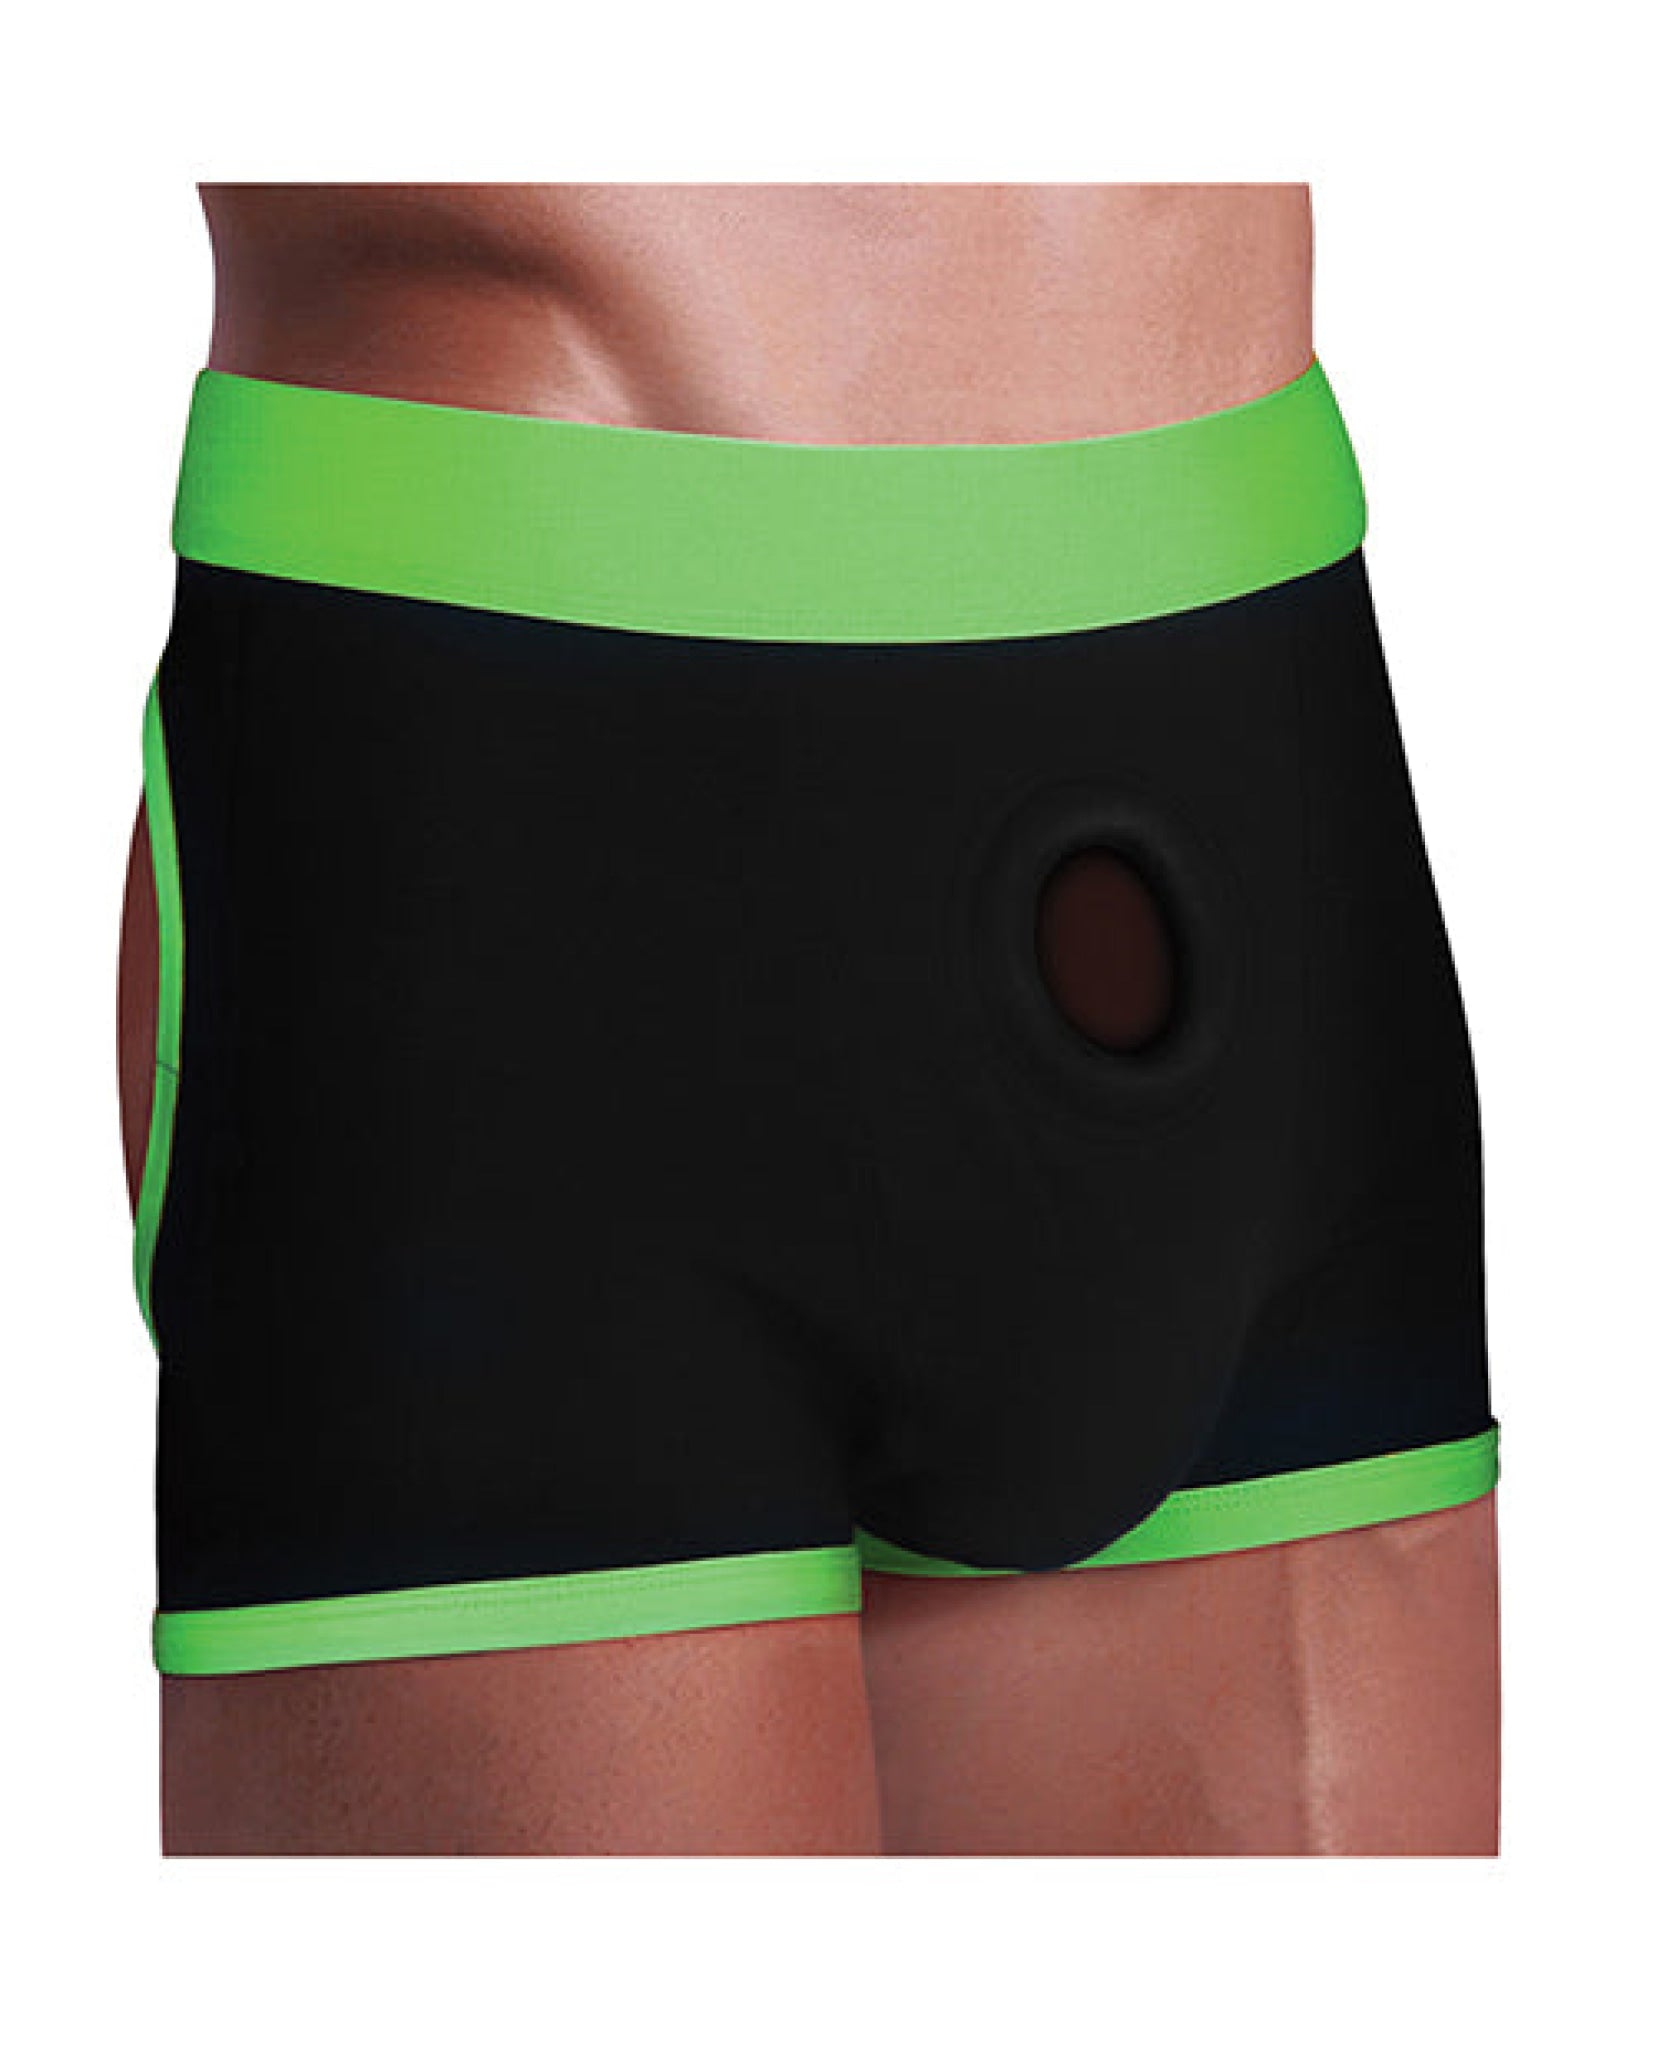 Get Lucky Strap On Boxers - Black/green Get Lucky